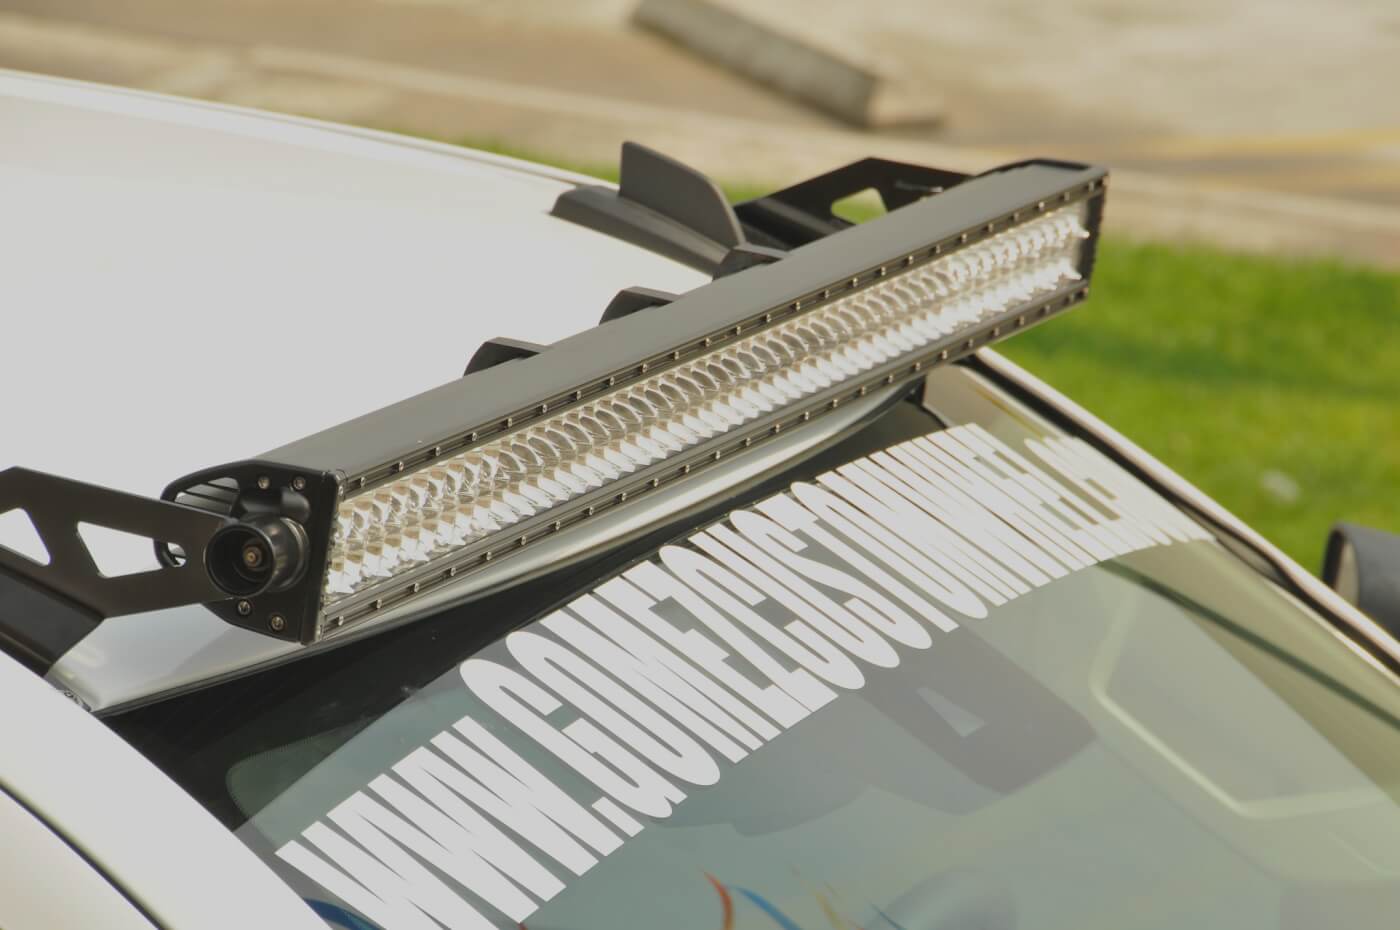 16. The Rigid Industries 50-inch LED light bar is pretty darn good looking, and it puts out a ton of light.